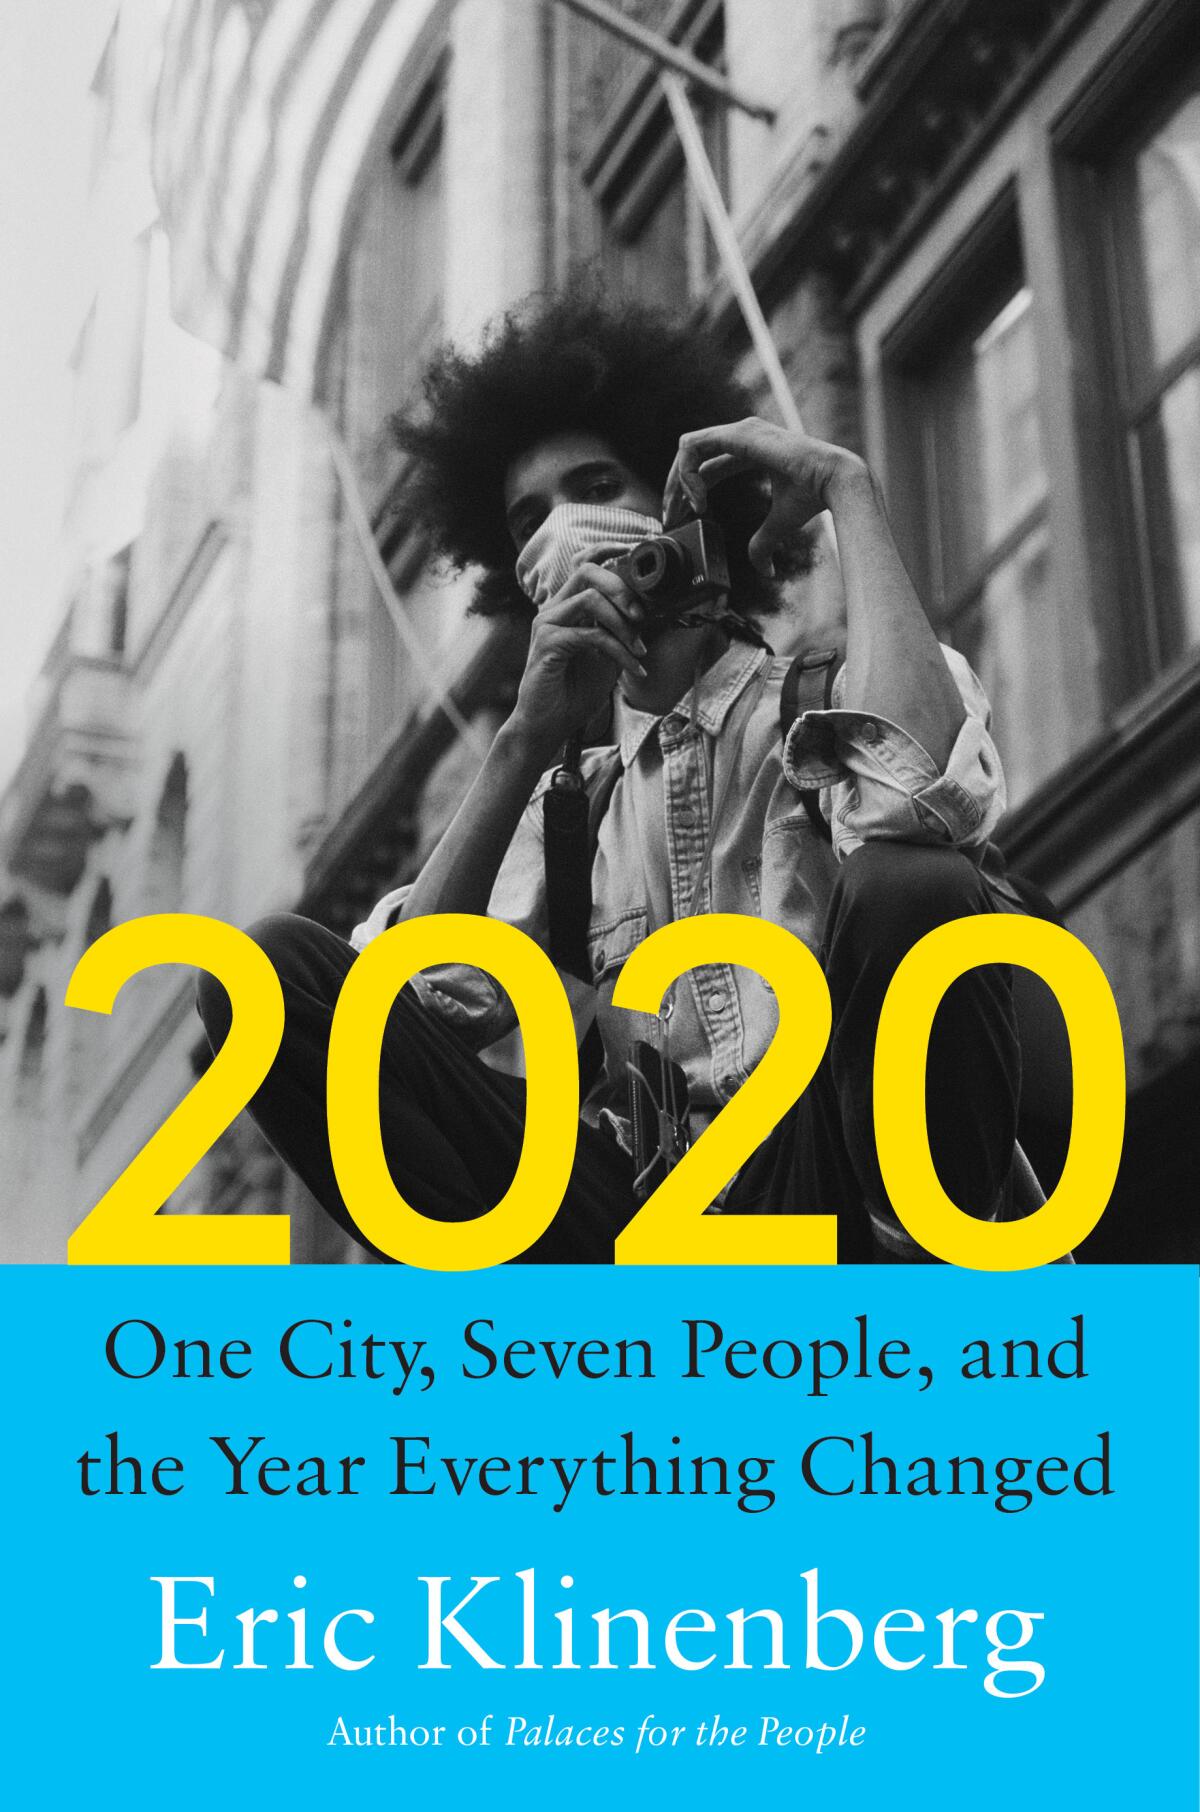 "2020: One City, Seven People, and the Year Everything Changed" by Eric Klinenberg